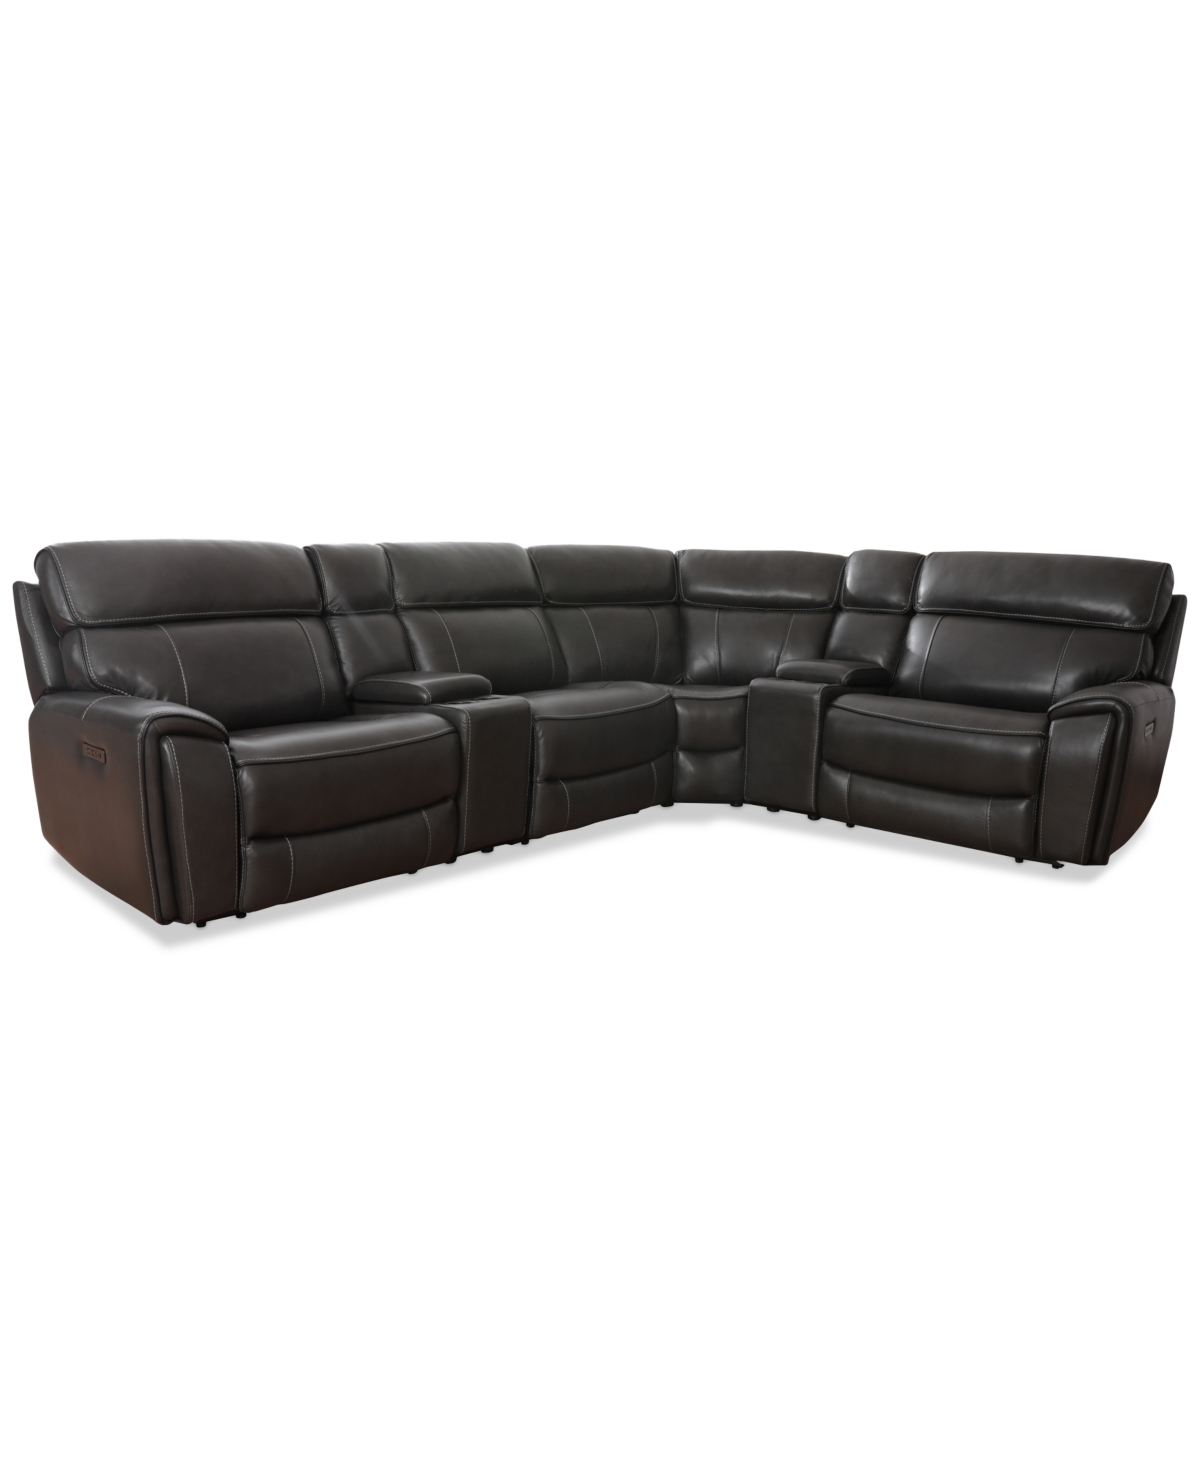 Macy's Hutchenson 132.5" 6-pc. Zero Gravity Leather Sectional With 2 Power Recliners And 2 Consoles, Create In Grey